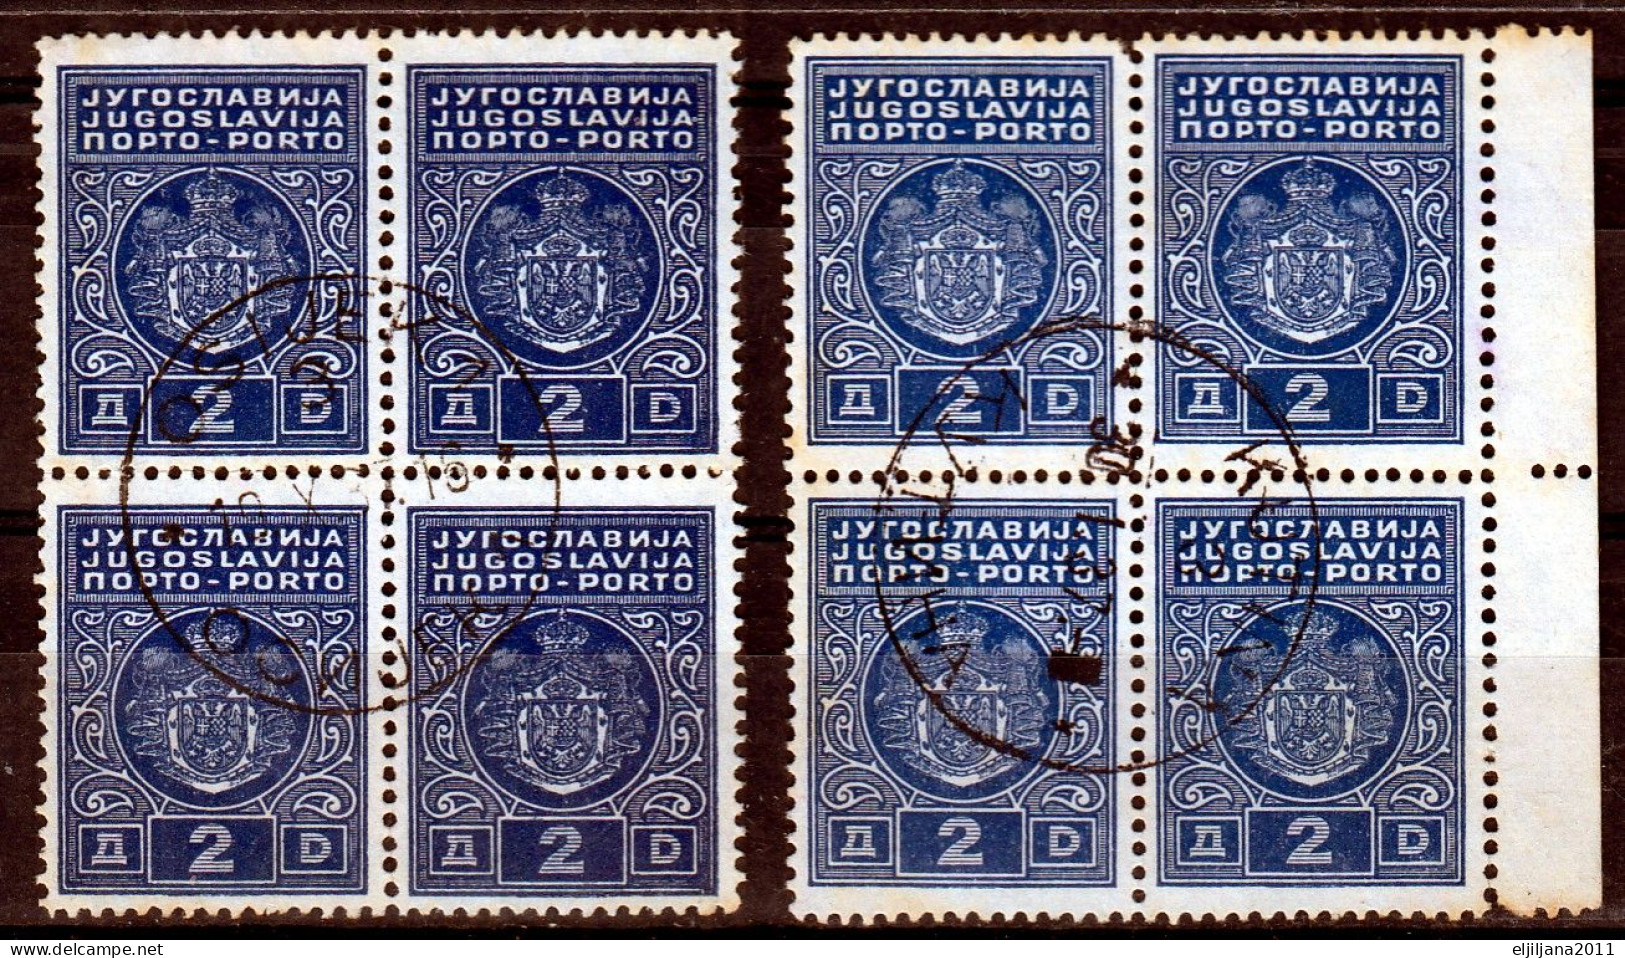 Action !! SALE !! 50 % OFF !! ⁕ Yugoslavia 1931 - 1940 ⁕ Postage Due Mi.64/68 With & Without Signature ⁕ 22v Used - Portomarken